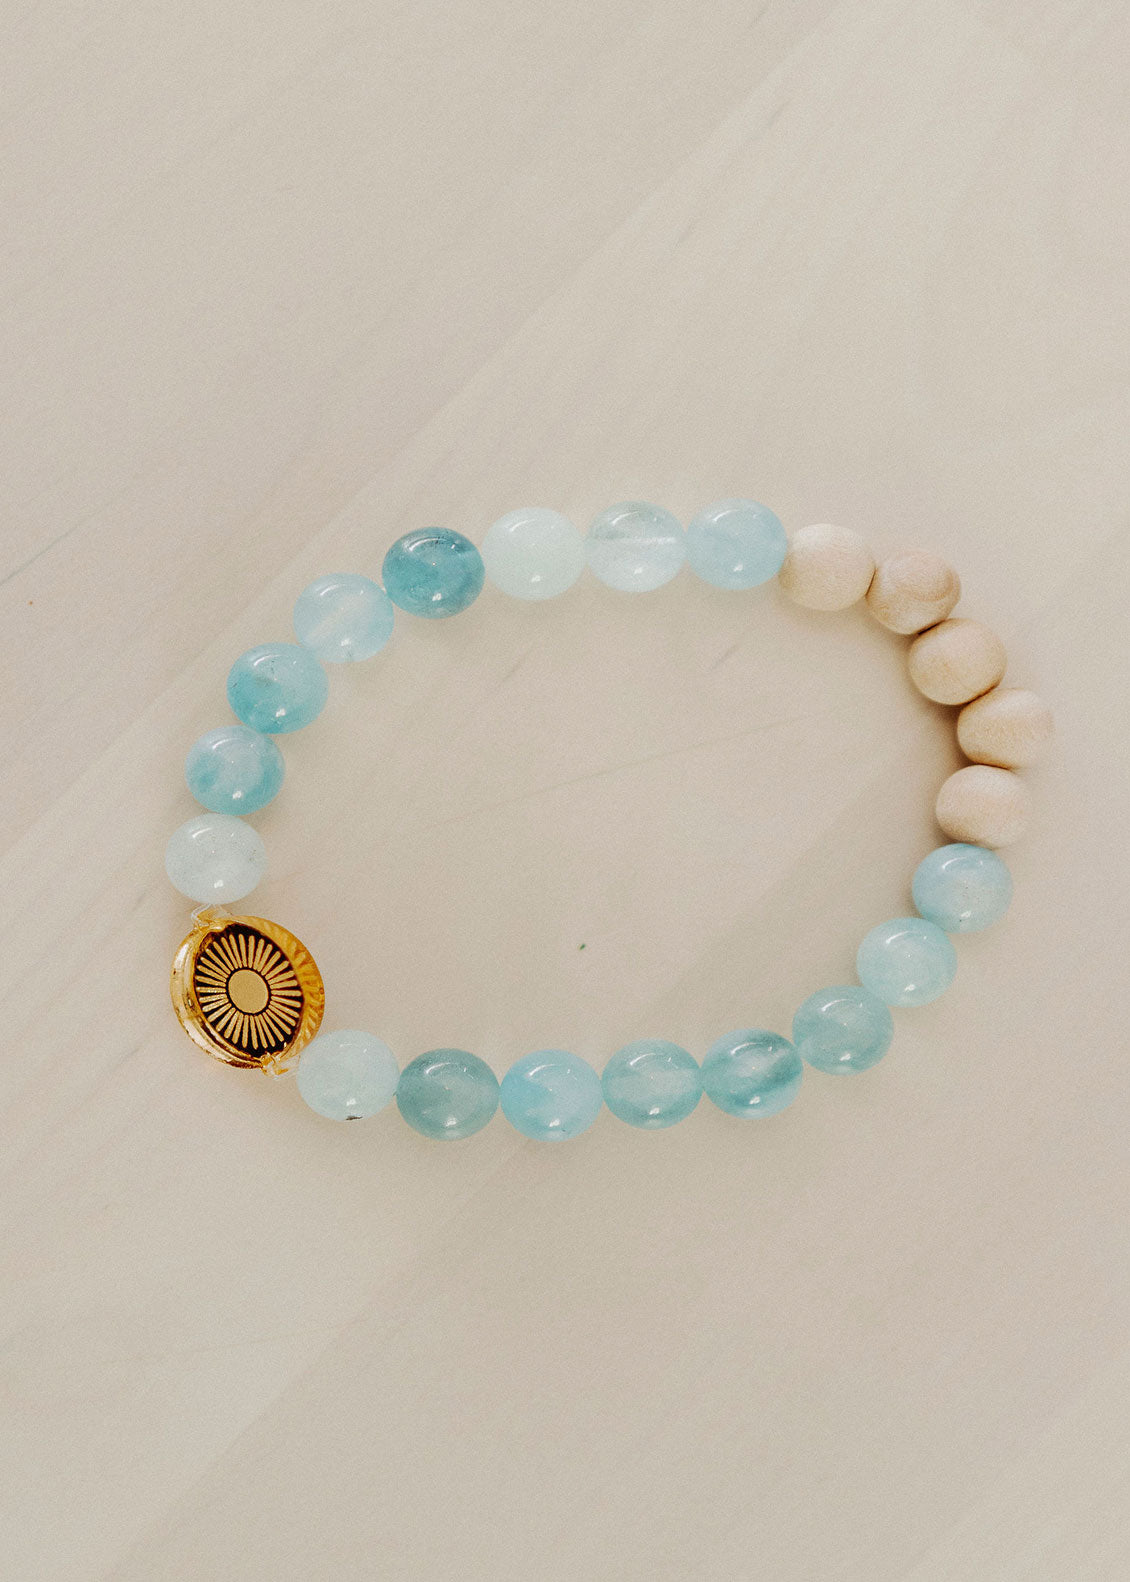 Load image into Gallery viewer, HERE COMES THE SUN AQUAMARINE OIL DIFFUSER BRACELET
